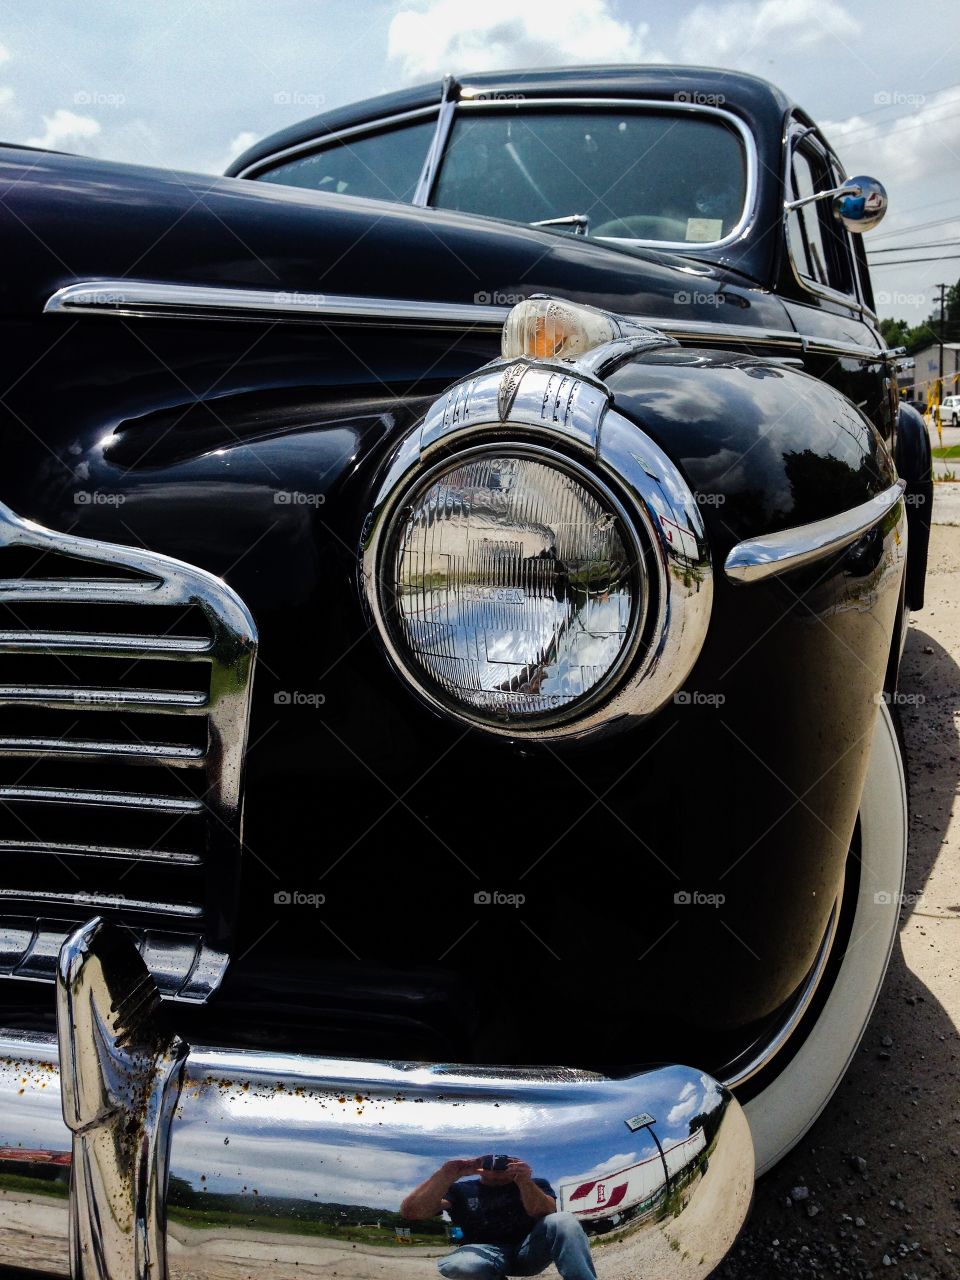 1941 vintage Buick car. Front headlight and bumper